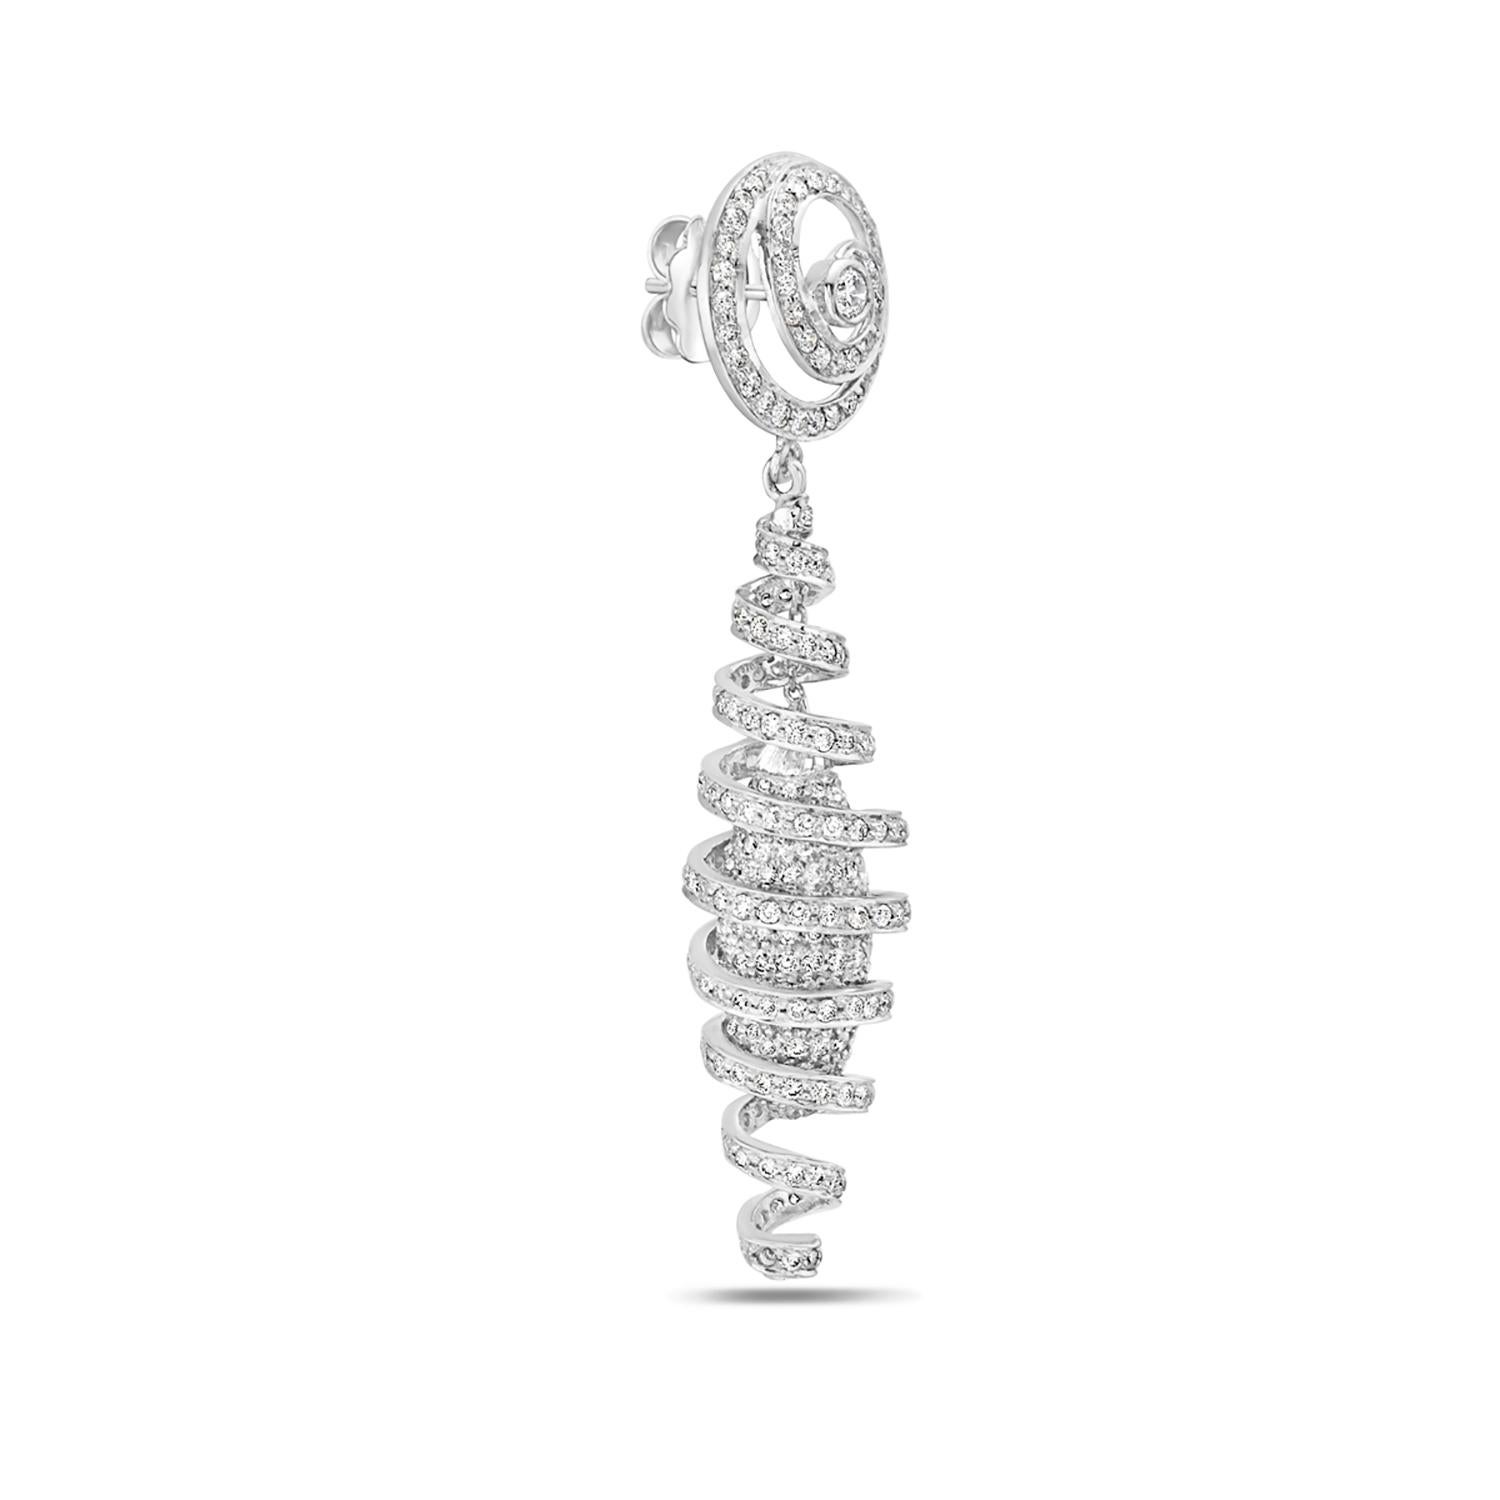 Artisan Spiral Shaped Earrings with Pave Halo Diamonds Made in 18k White Gold For Sale